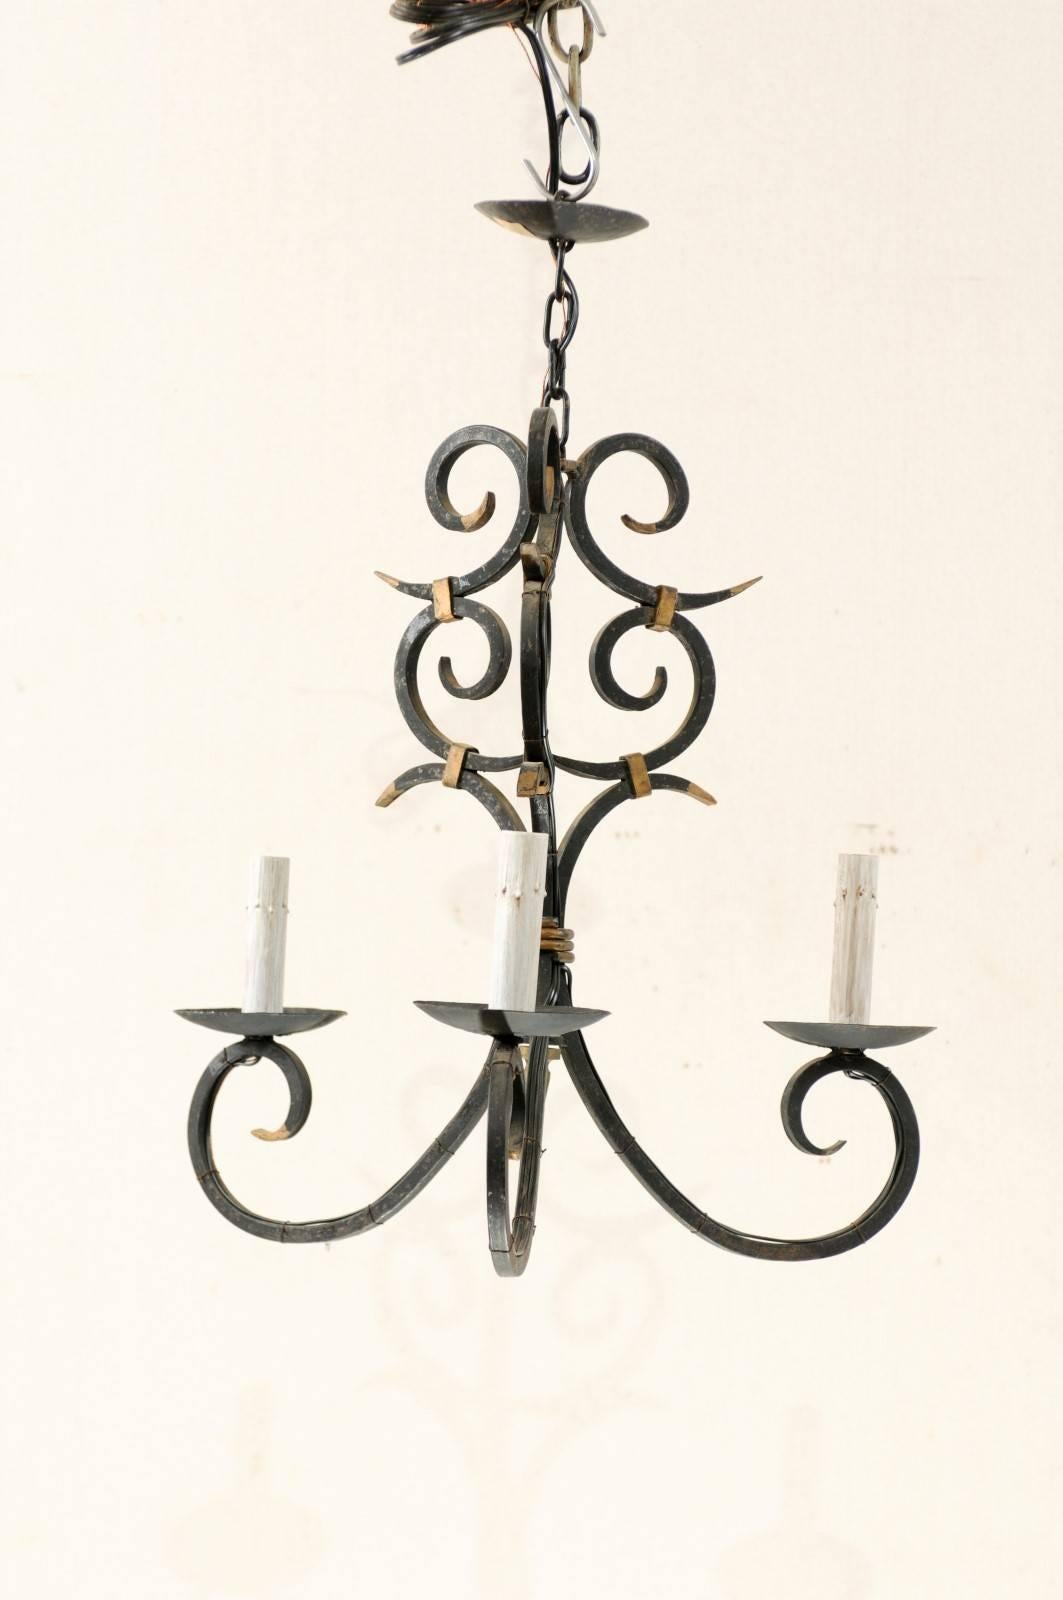 French Forged Iron Three-Light Chandelier with Scrolled Arms and Gilded Accents 1